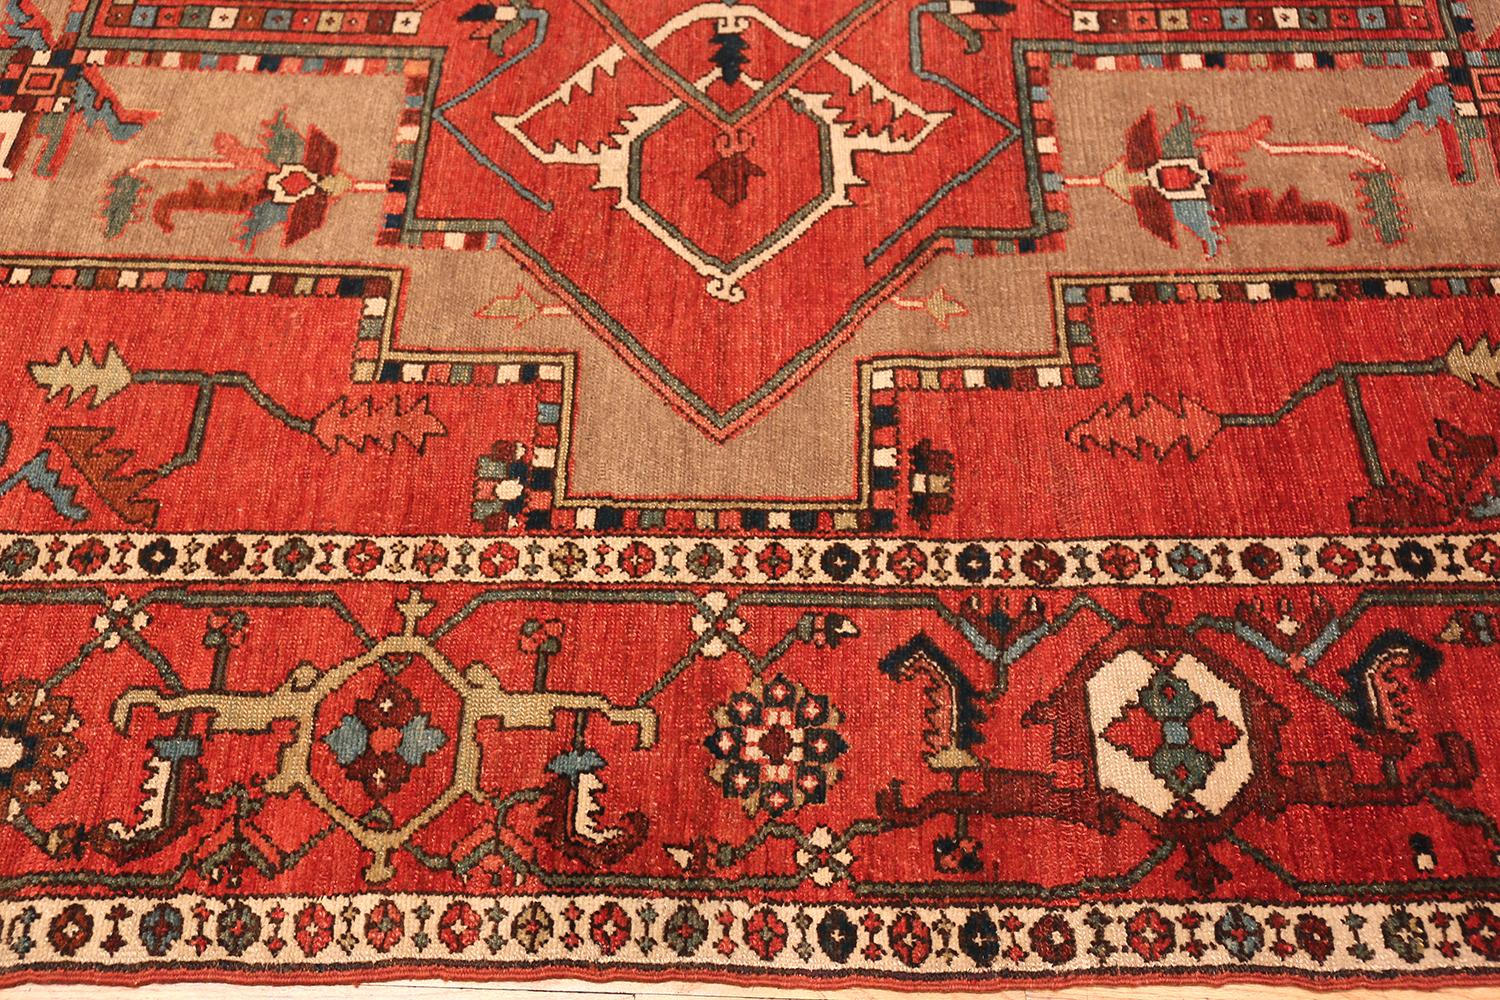 Breathtaking large size geometric design antique Persian Serapi rug, country of origin / rug type: Persian rugs, date circa 1900. Size: 11 ft 6 in x 15 ft (3.51 m x 4.57 m).